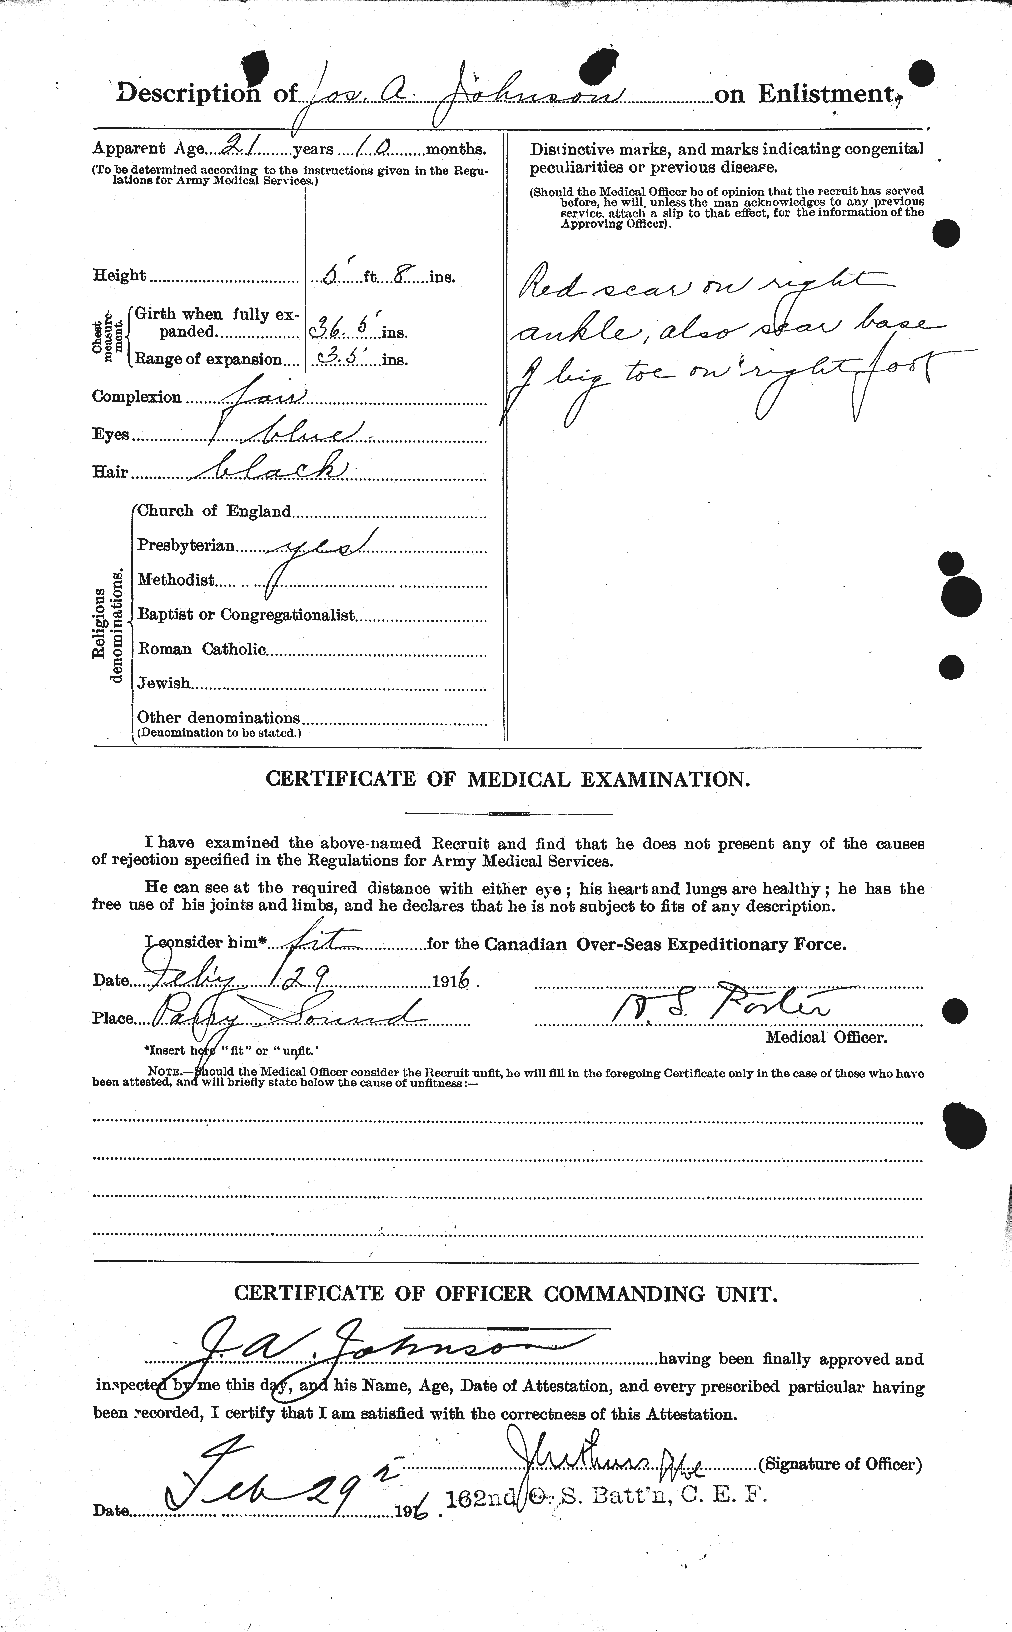 Personnel Records of the First World War - CEF 422024b